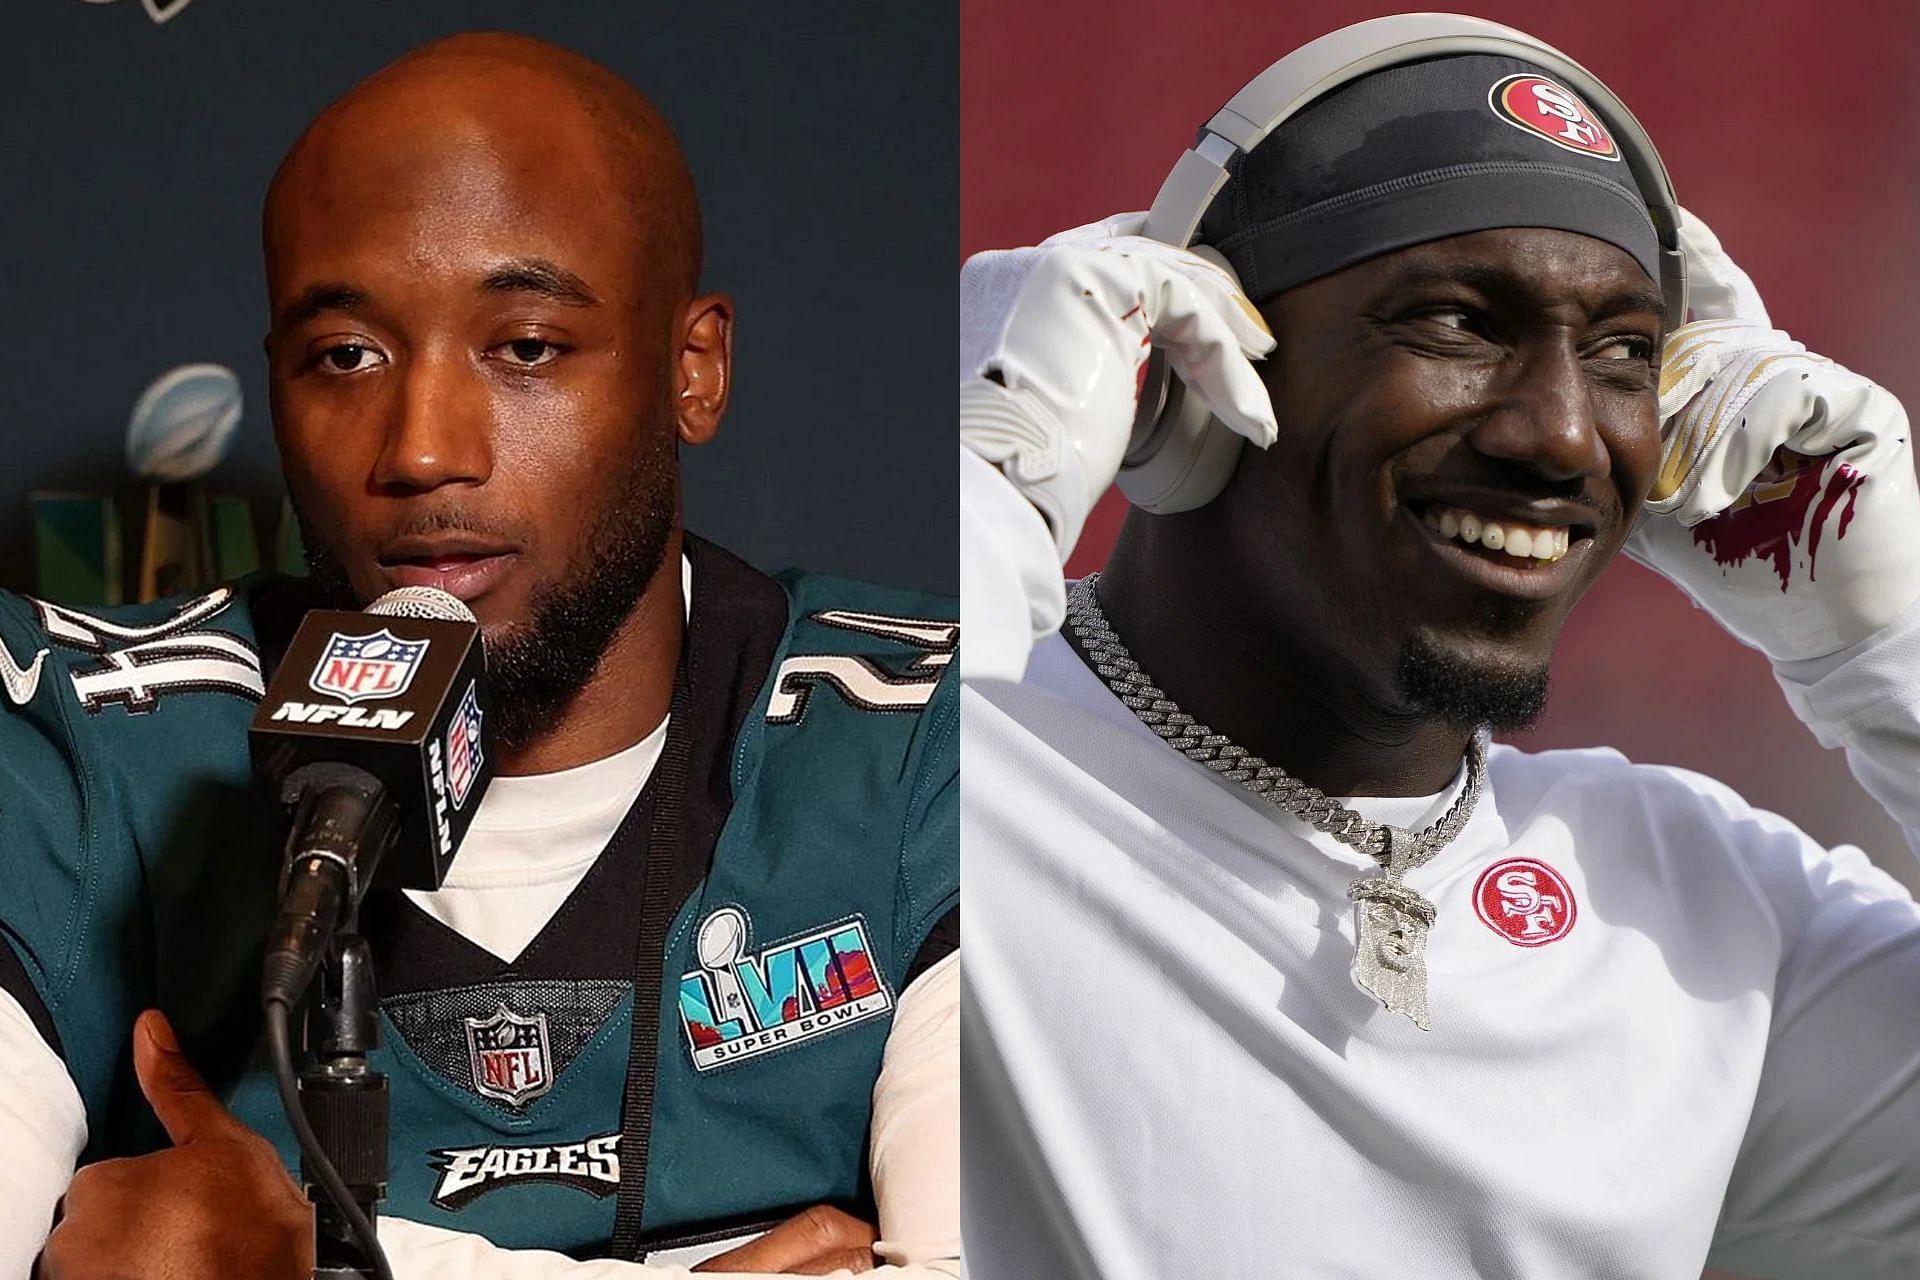 &quot;Deebo Samuel was right&quot;: James Bradberry labeled as &quot;trash&quot; by fans as Eagles suffer 